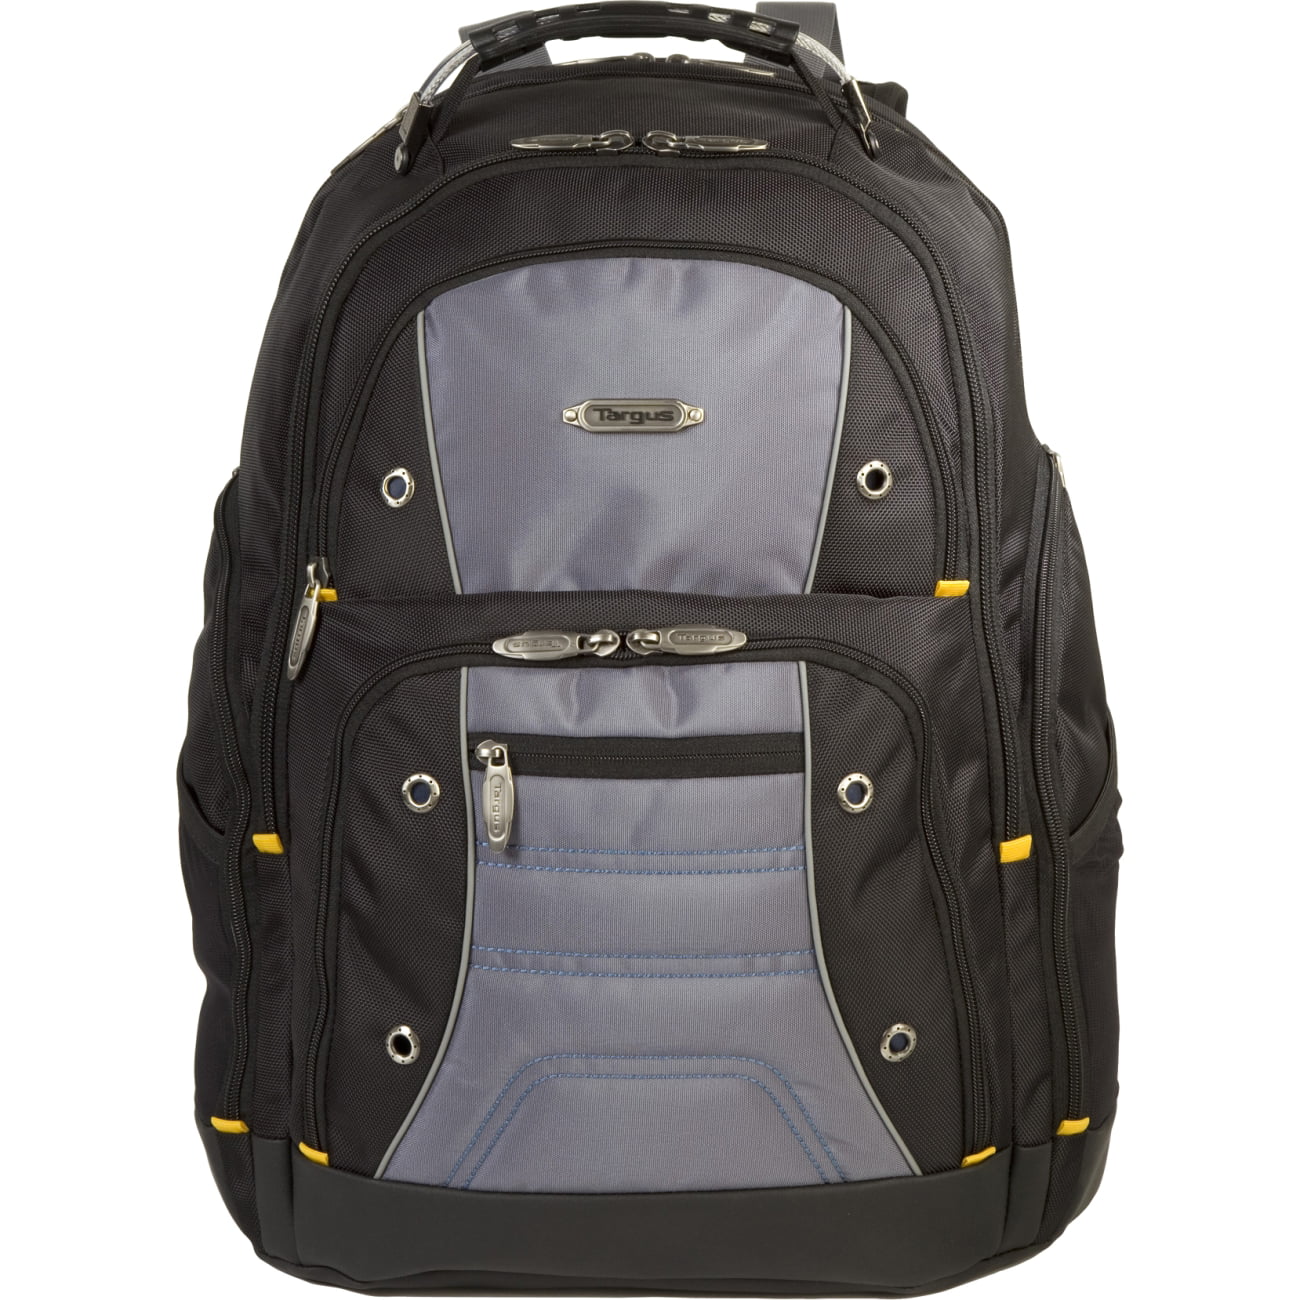 Black//Grey 15.6-Inch Fits Most Laptop Students and Gaming Targus Drifter Backpack//Rucksack Best for Work